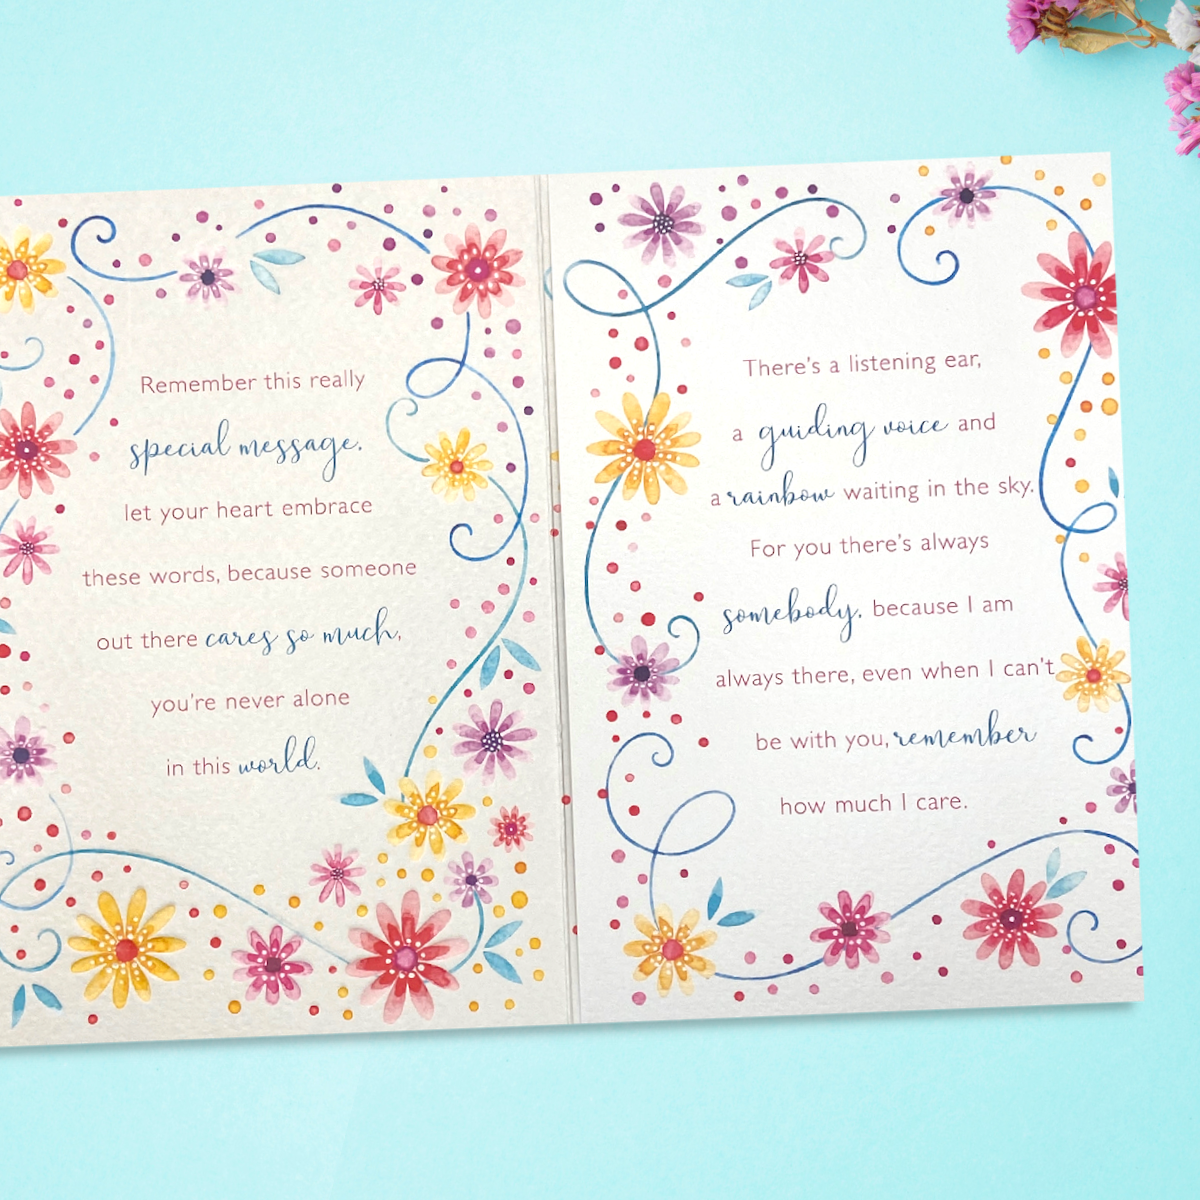 Inside image showing two pages of verse surrounded by watercolour flowers